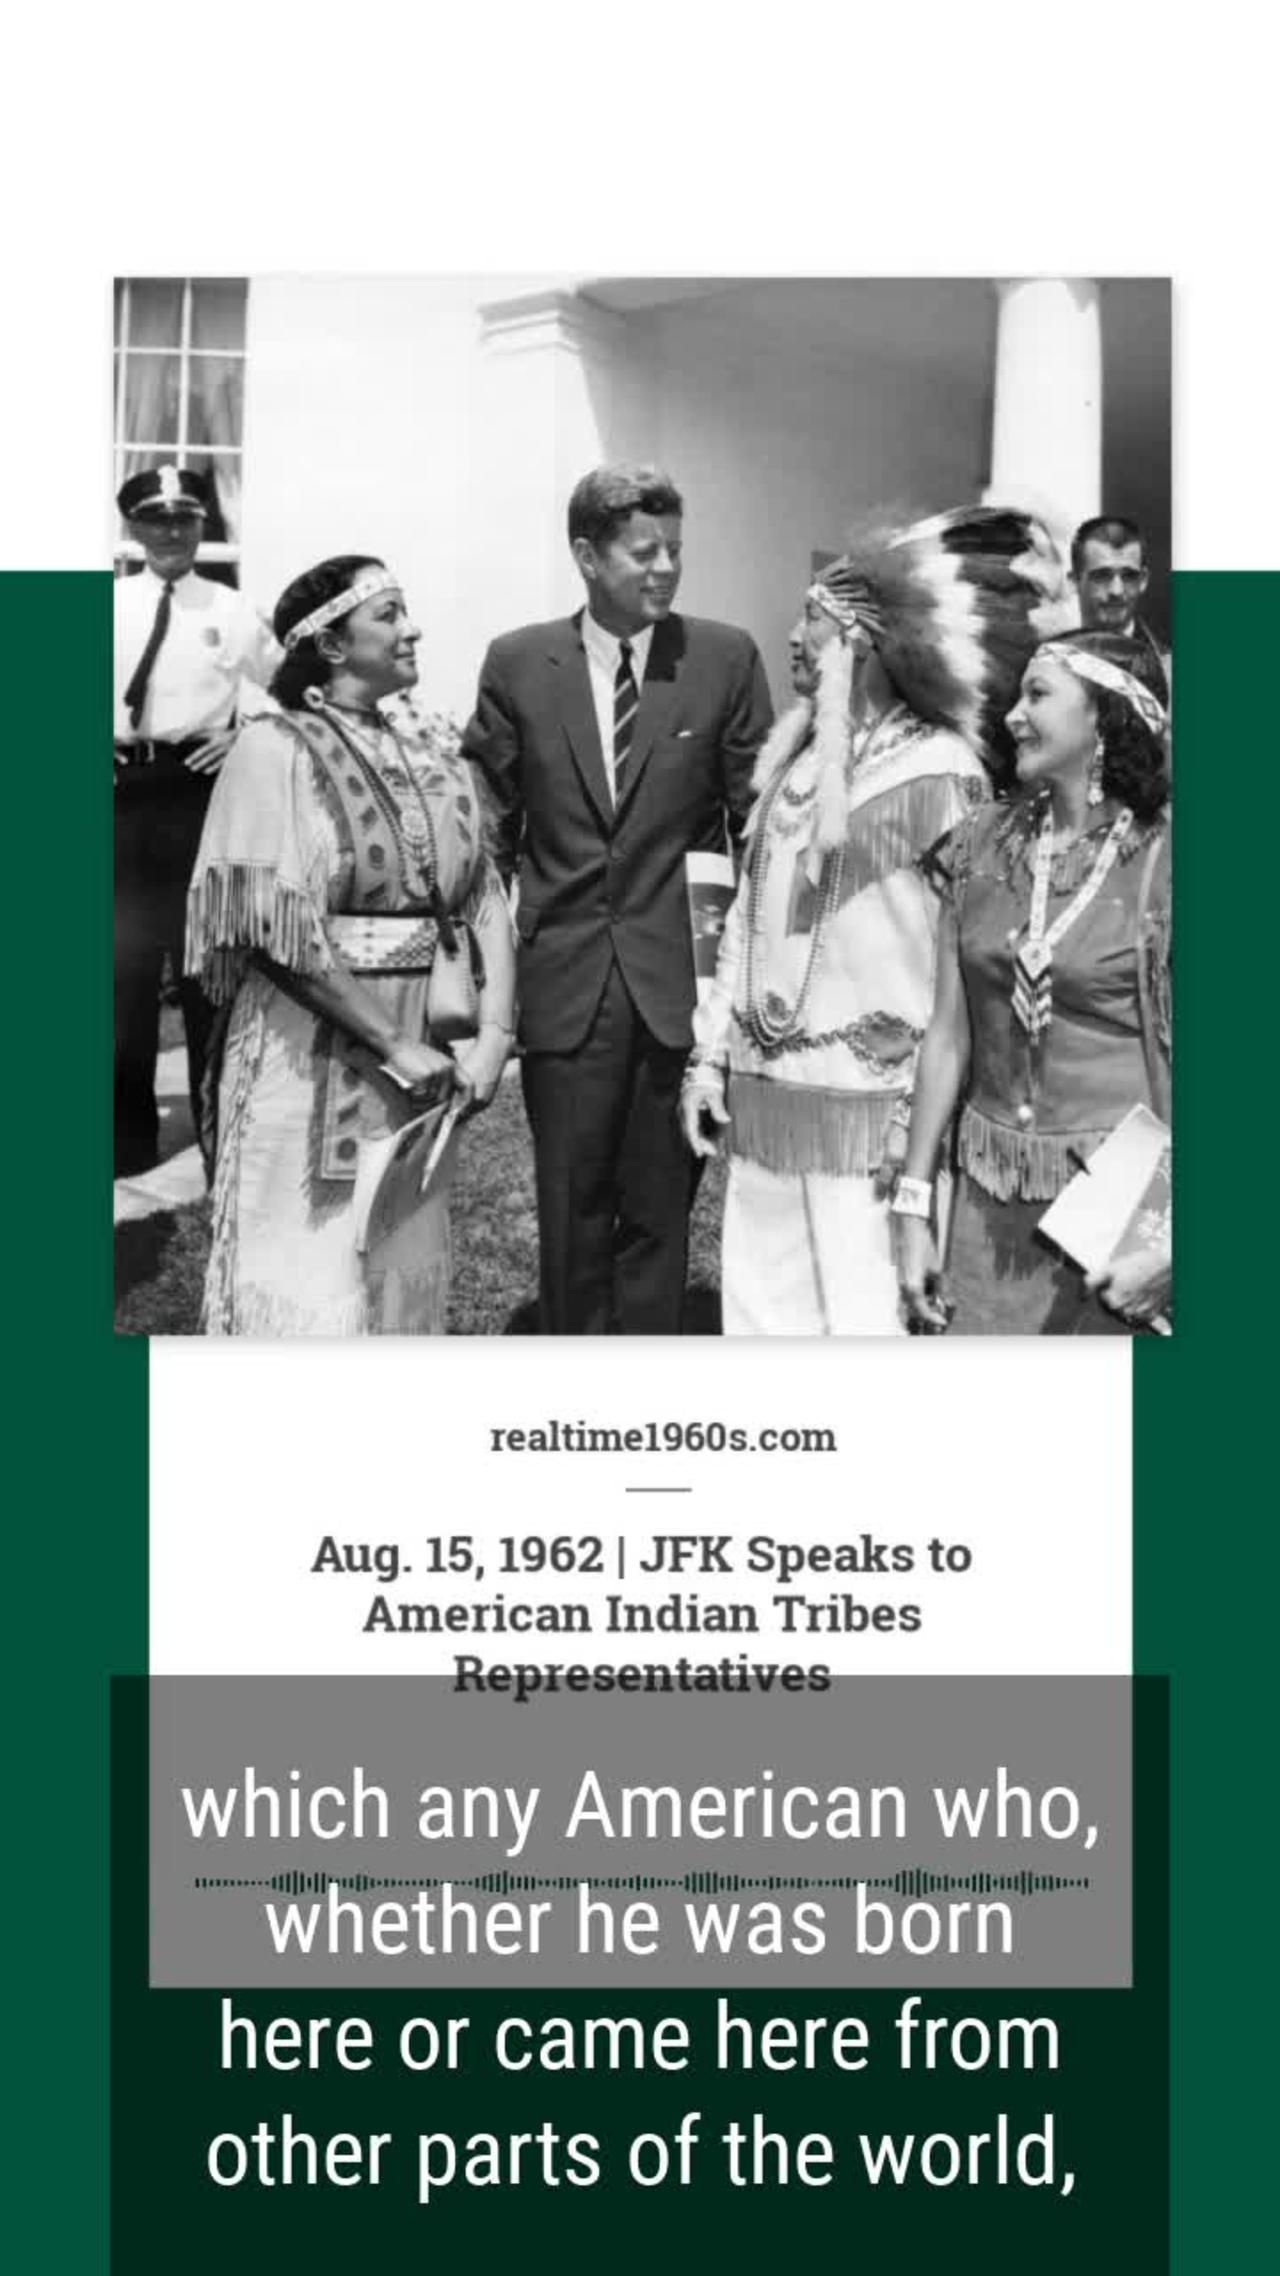 Aug. 15, 1962 - JFK Remarks to American Indians